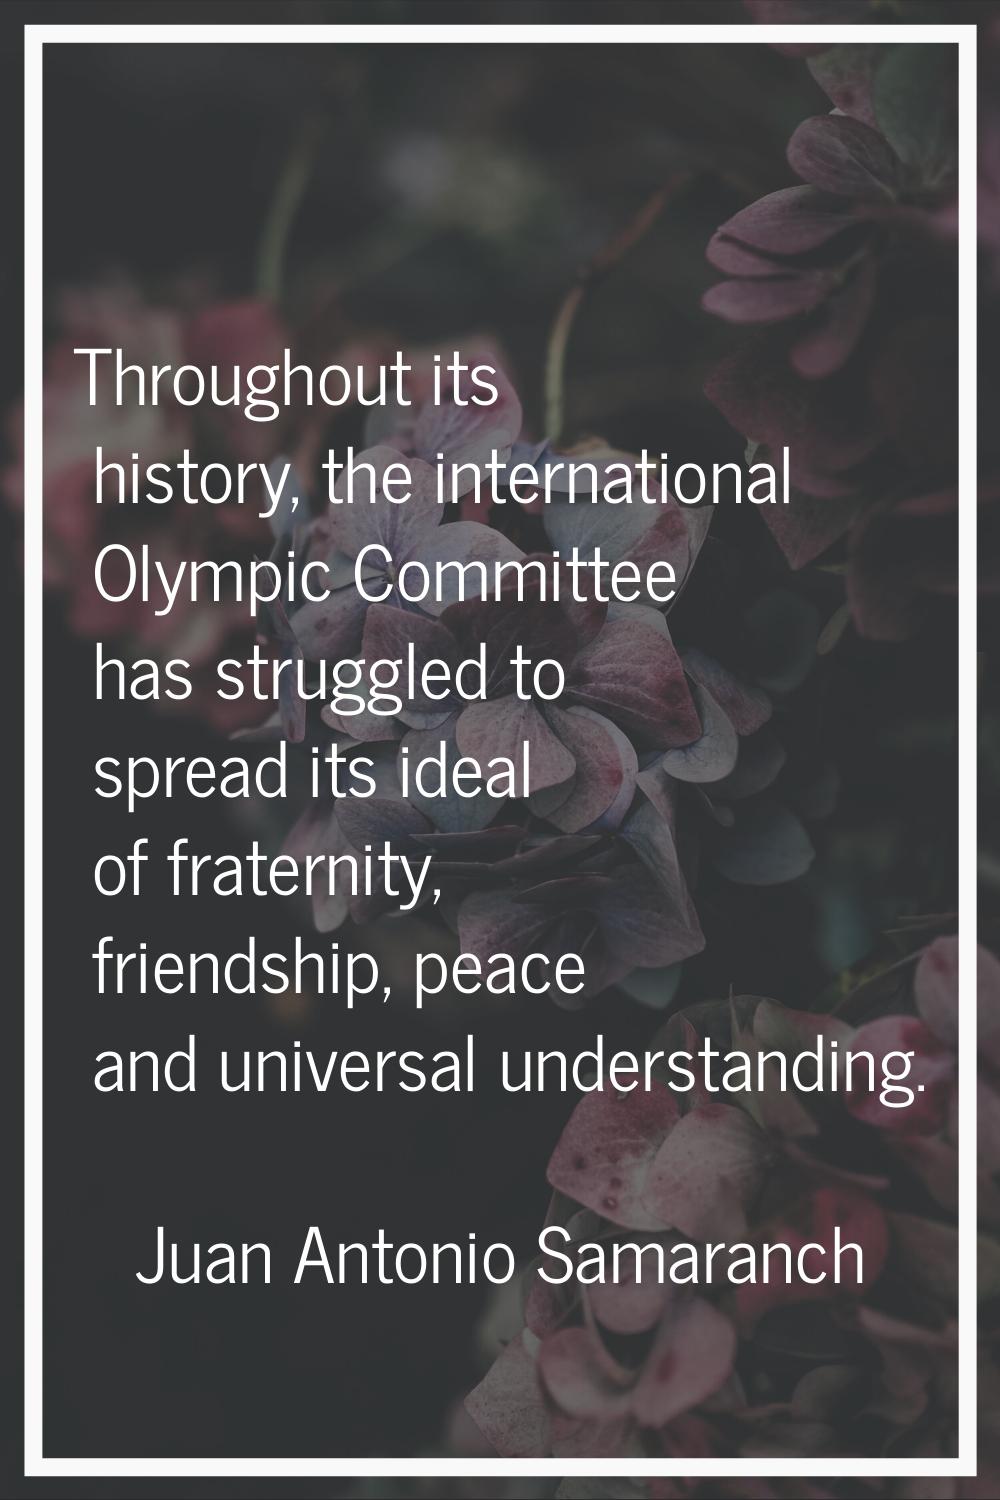 Throughout its history, the international Olympic Committee has struggled to spread its ideal of fr